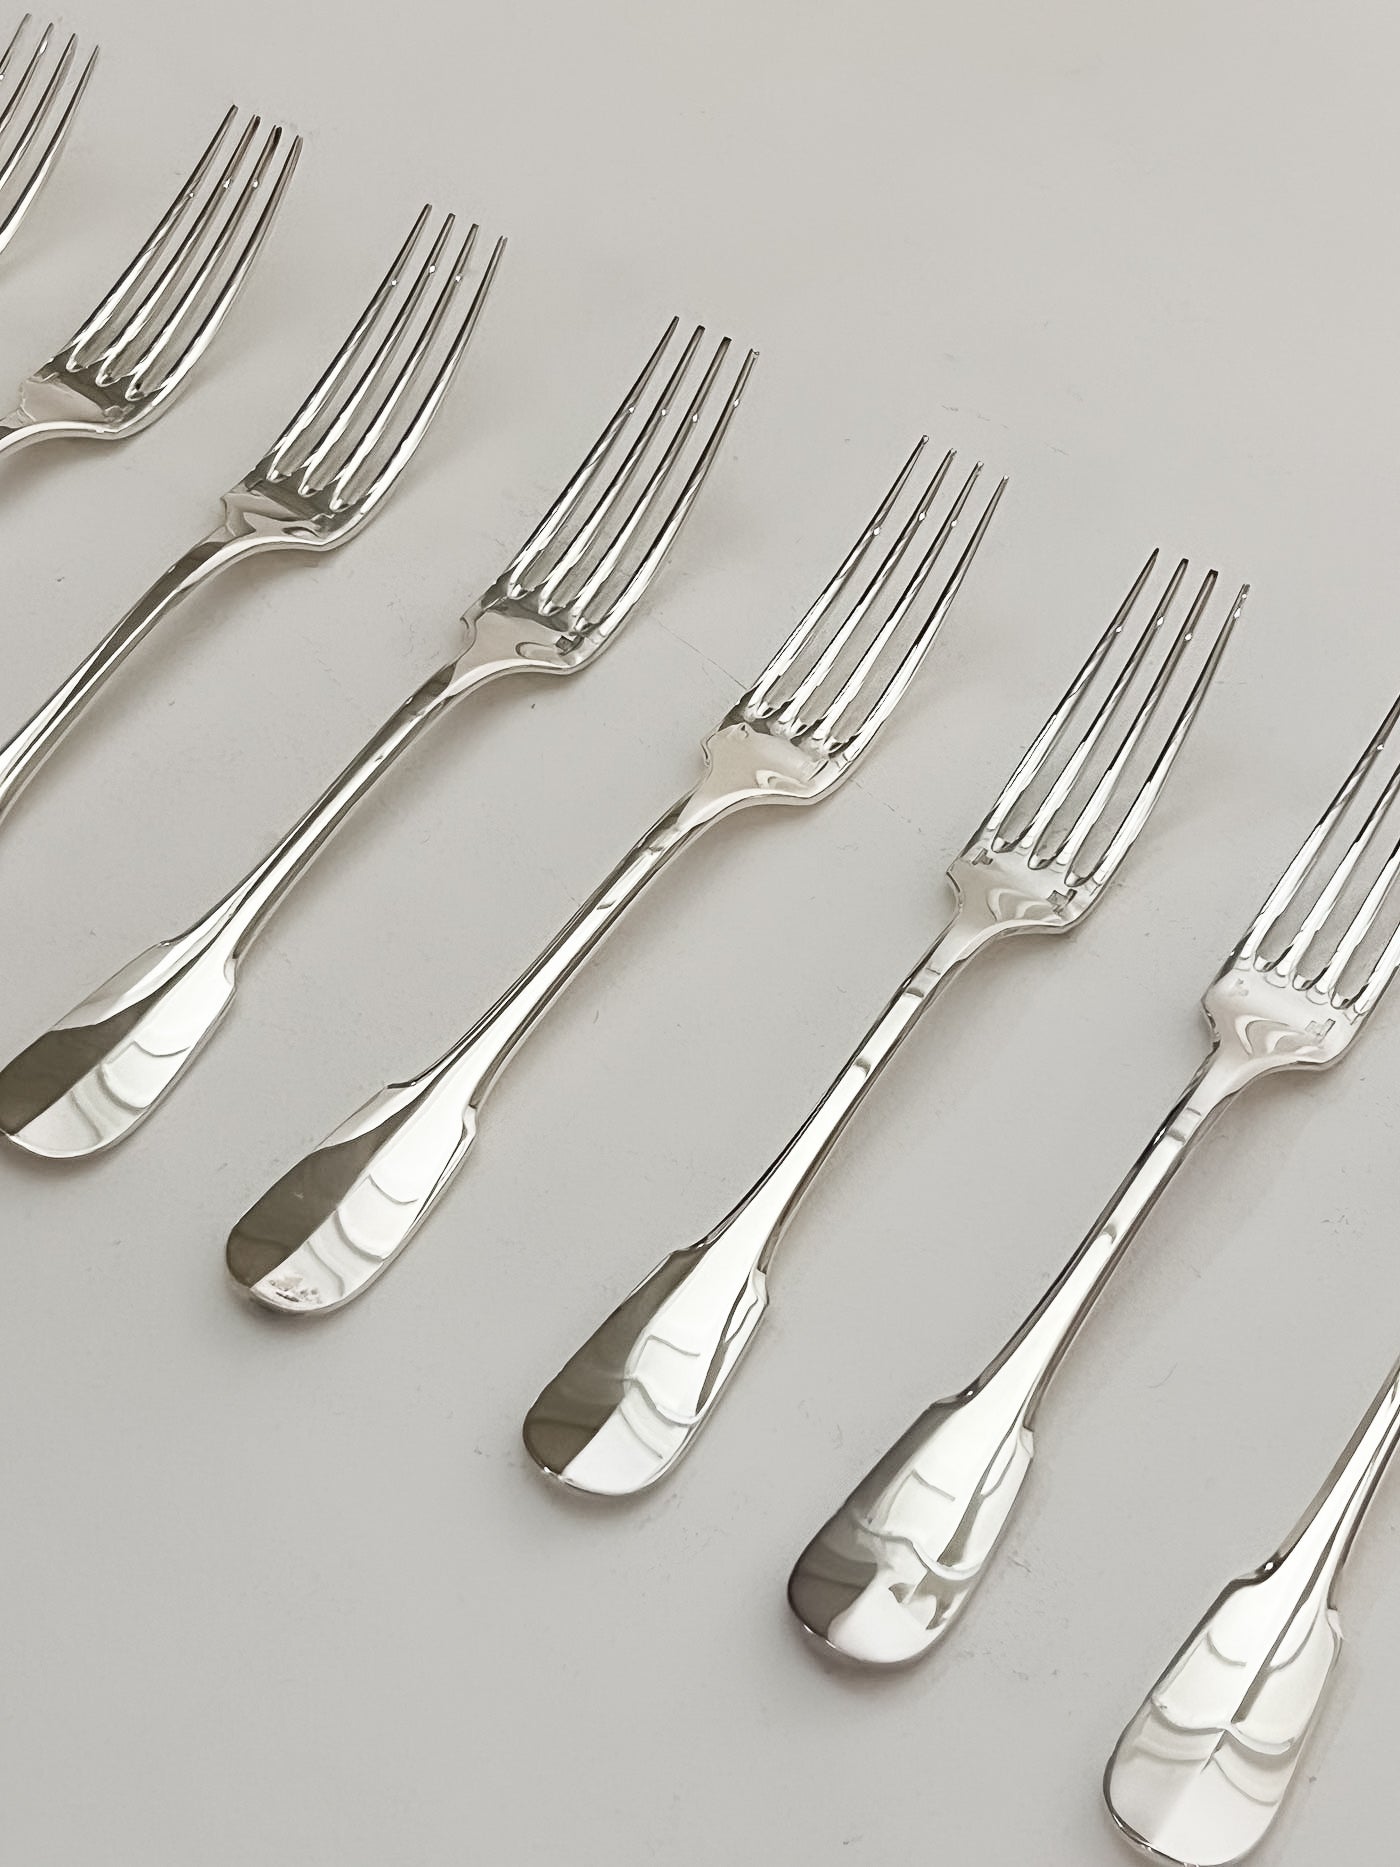 Christofle cutlery 26 pieces